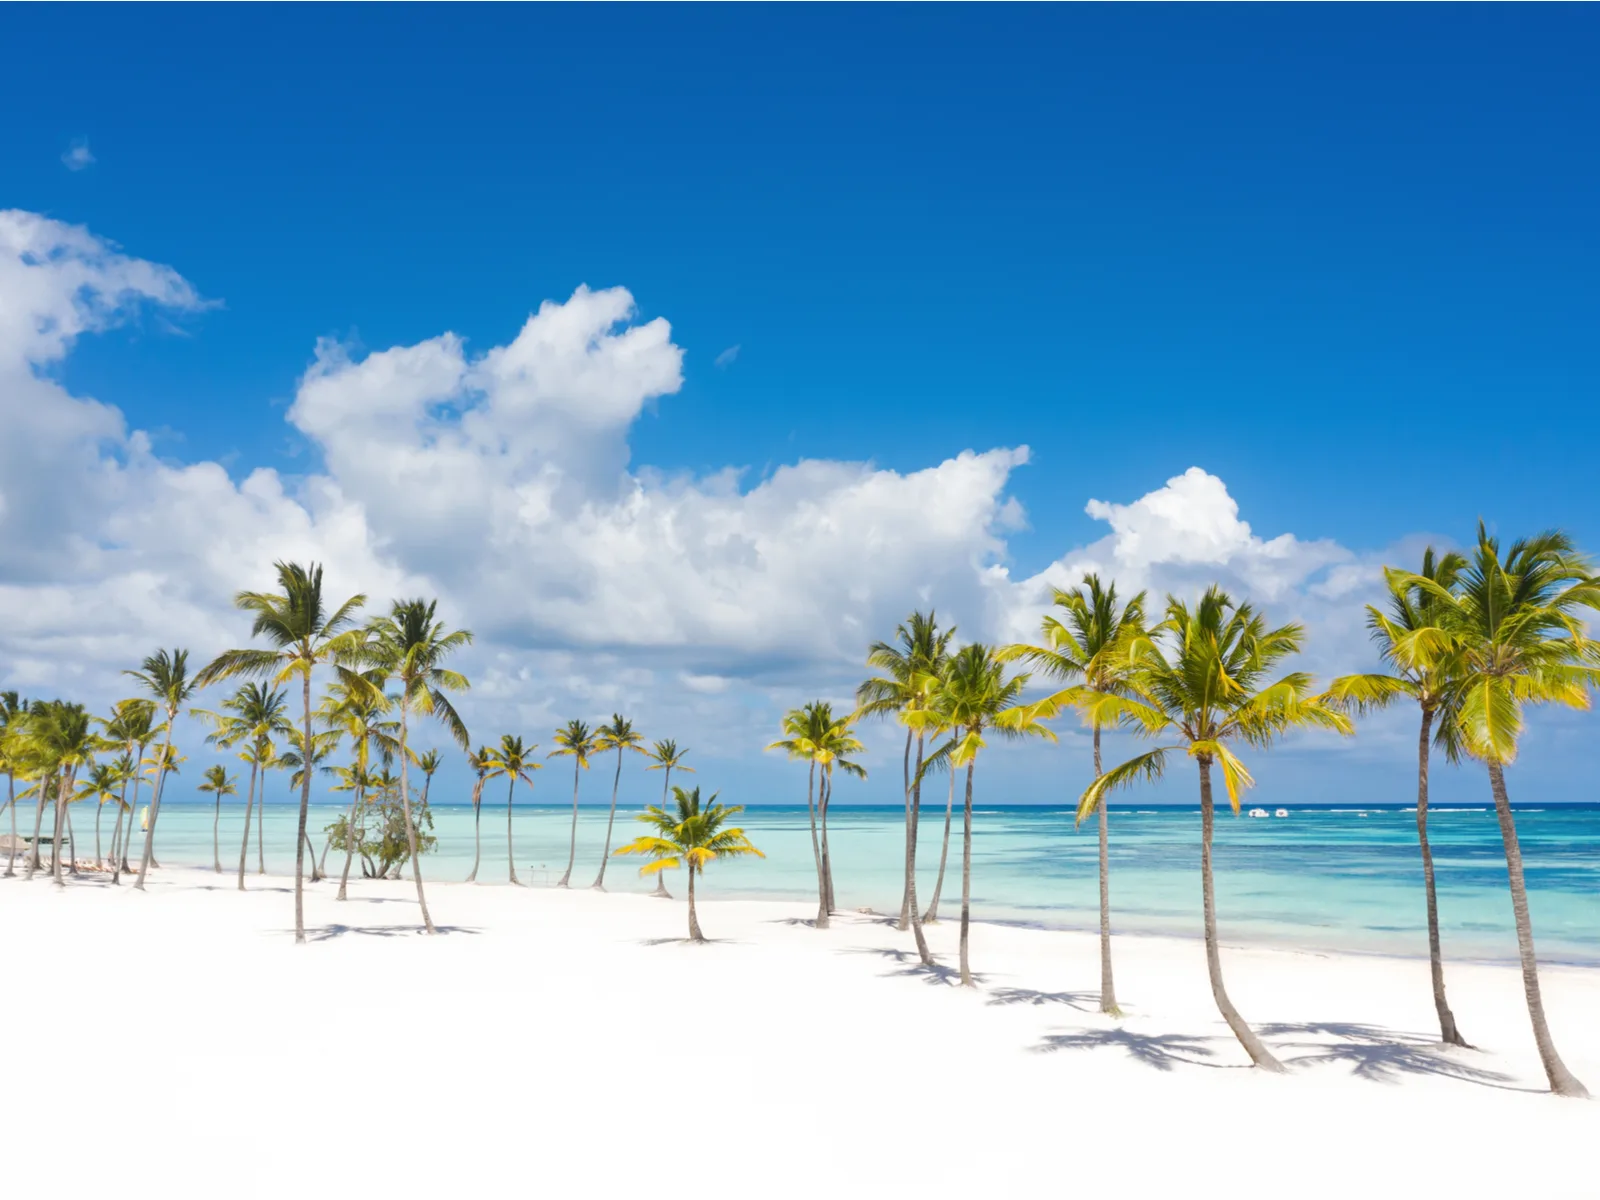 A row of thin palm trees rooted on fine white sand and peaceful waters, a piece on the best beaches in the Dominican Republic, at Juanillo Beach in Punta Cana